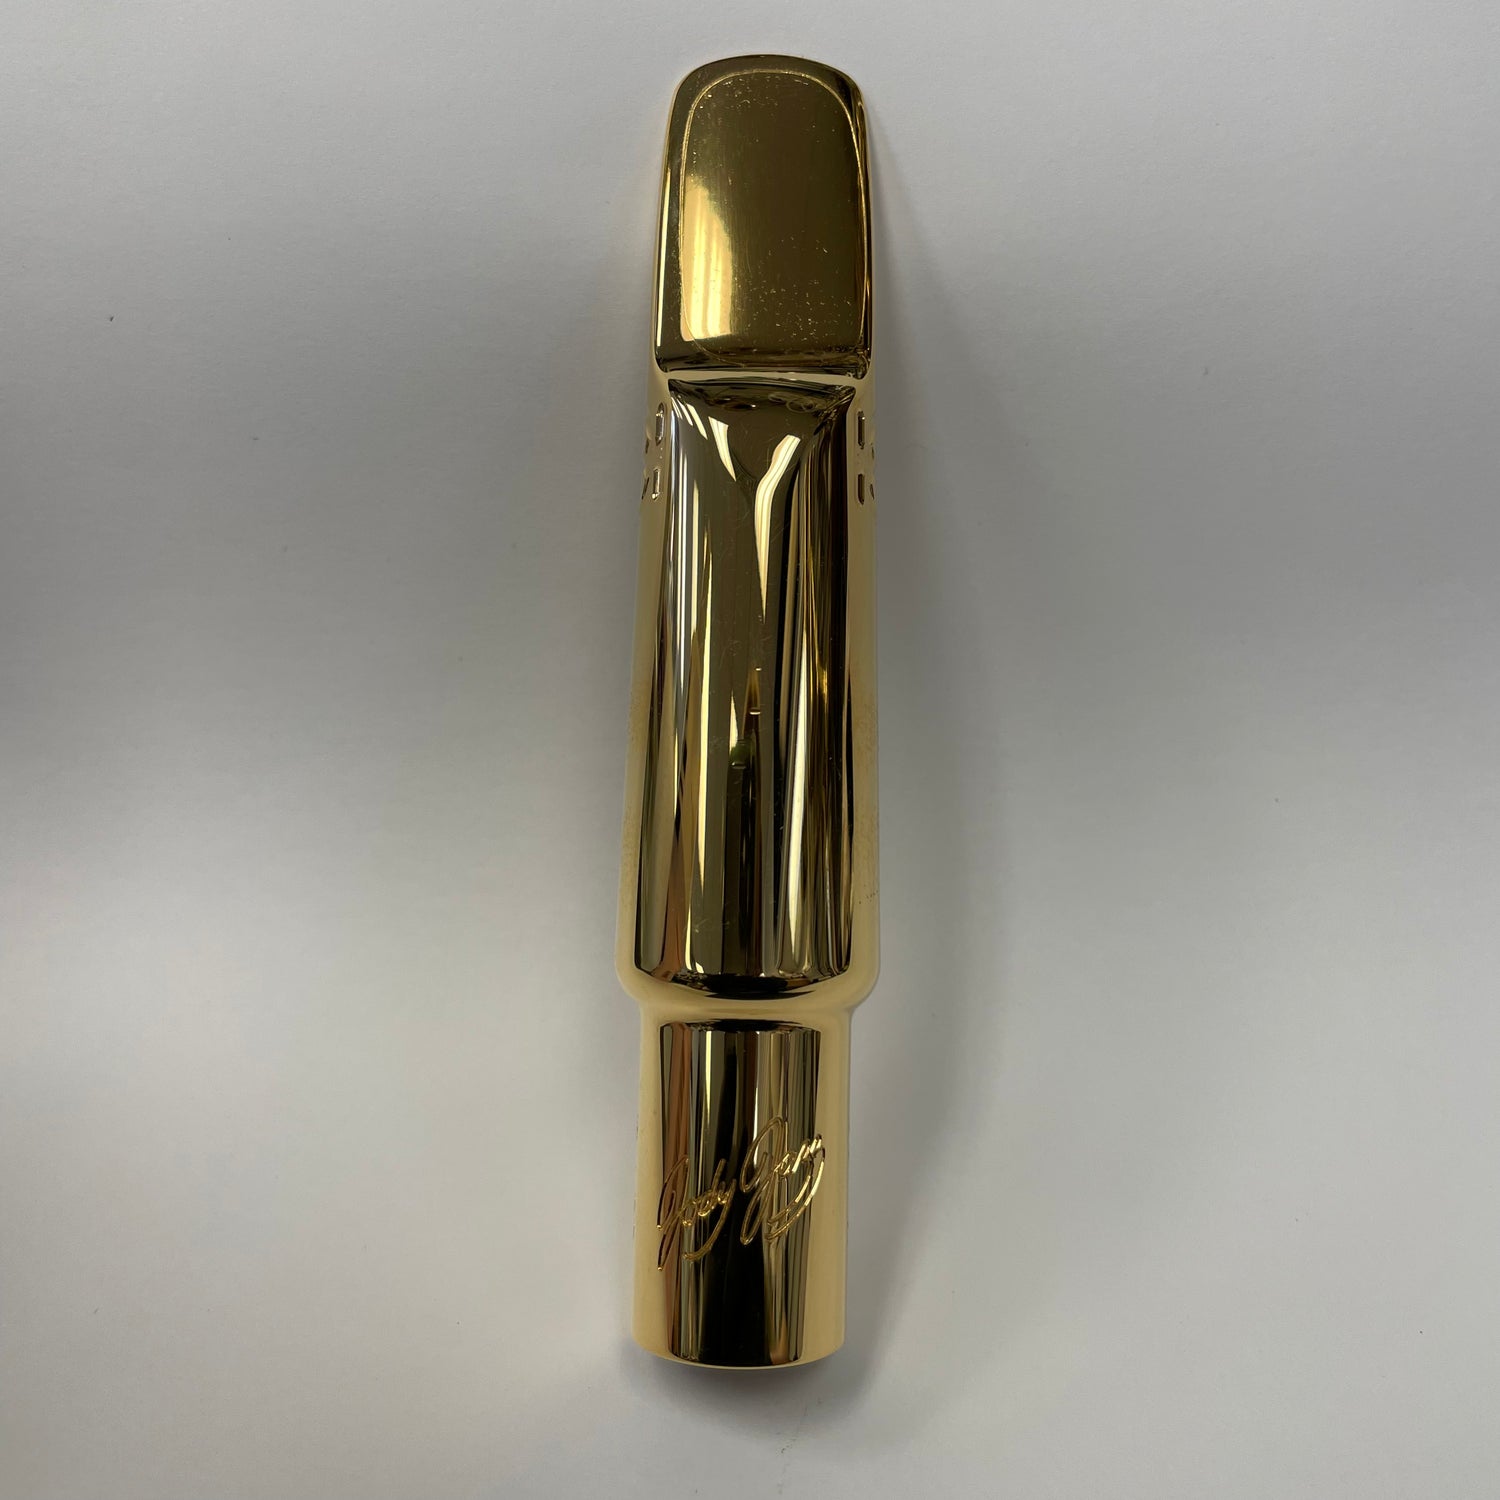 All Pre-Owned/Vintage Sax Mouthpieces